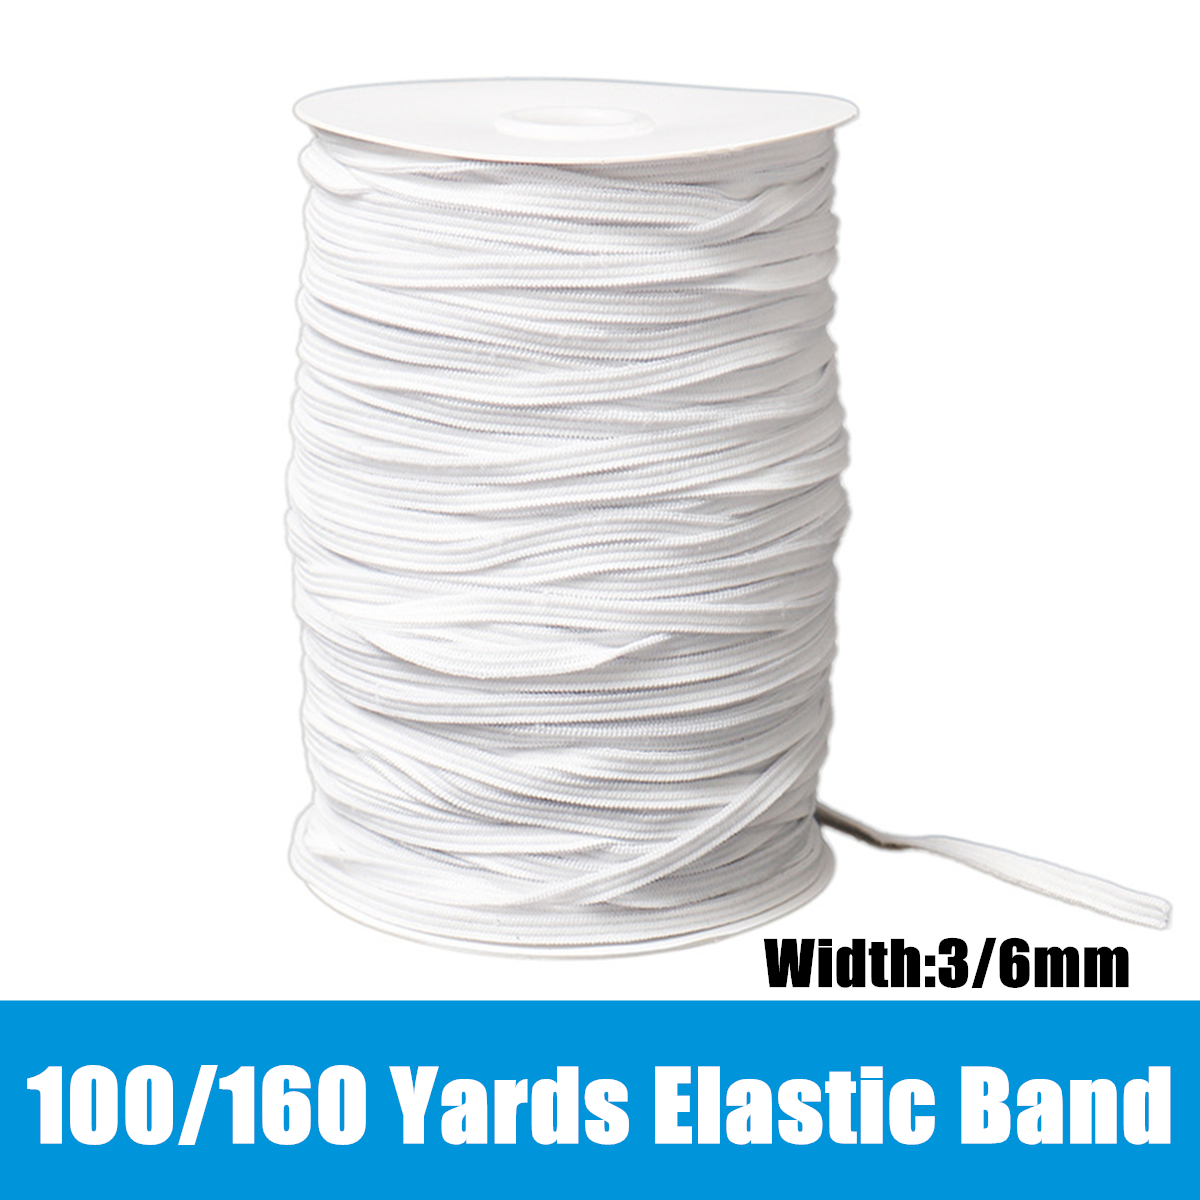 100160-Yards-DIY-Elastic-Band-Sewing-Crafting-Making-Braided-Cords-Knit-White-1671316-1